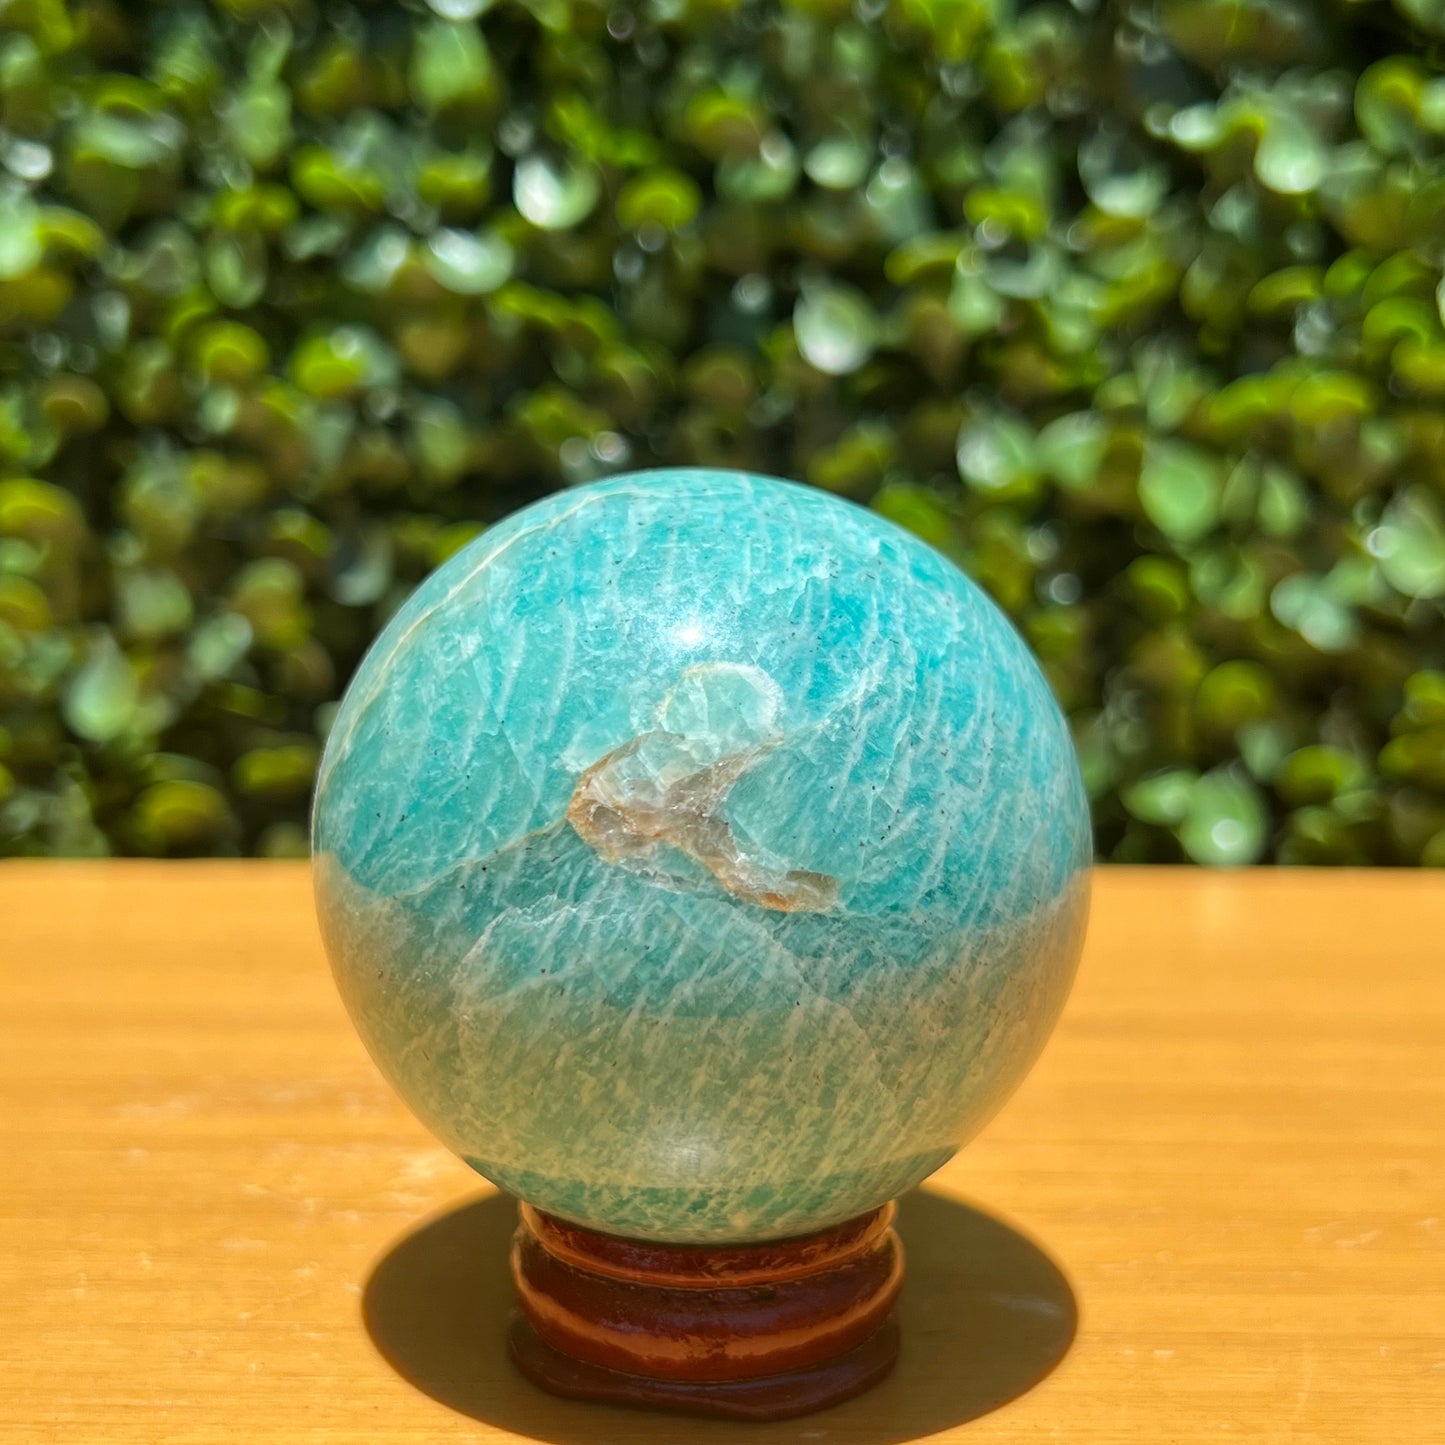 Amazonite Crystal Sphere With Smokey Inclusion